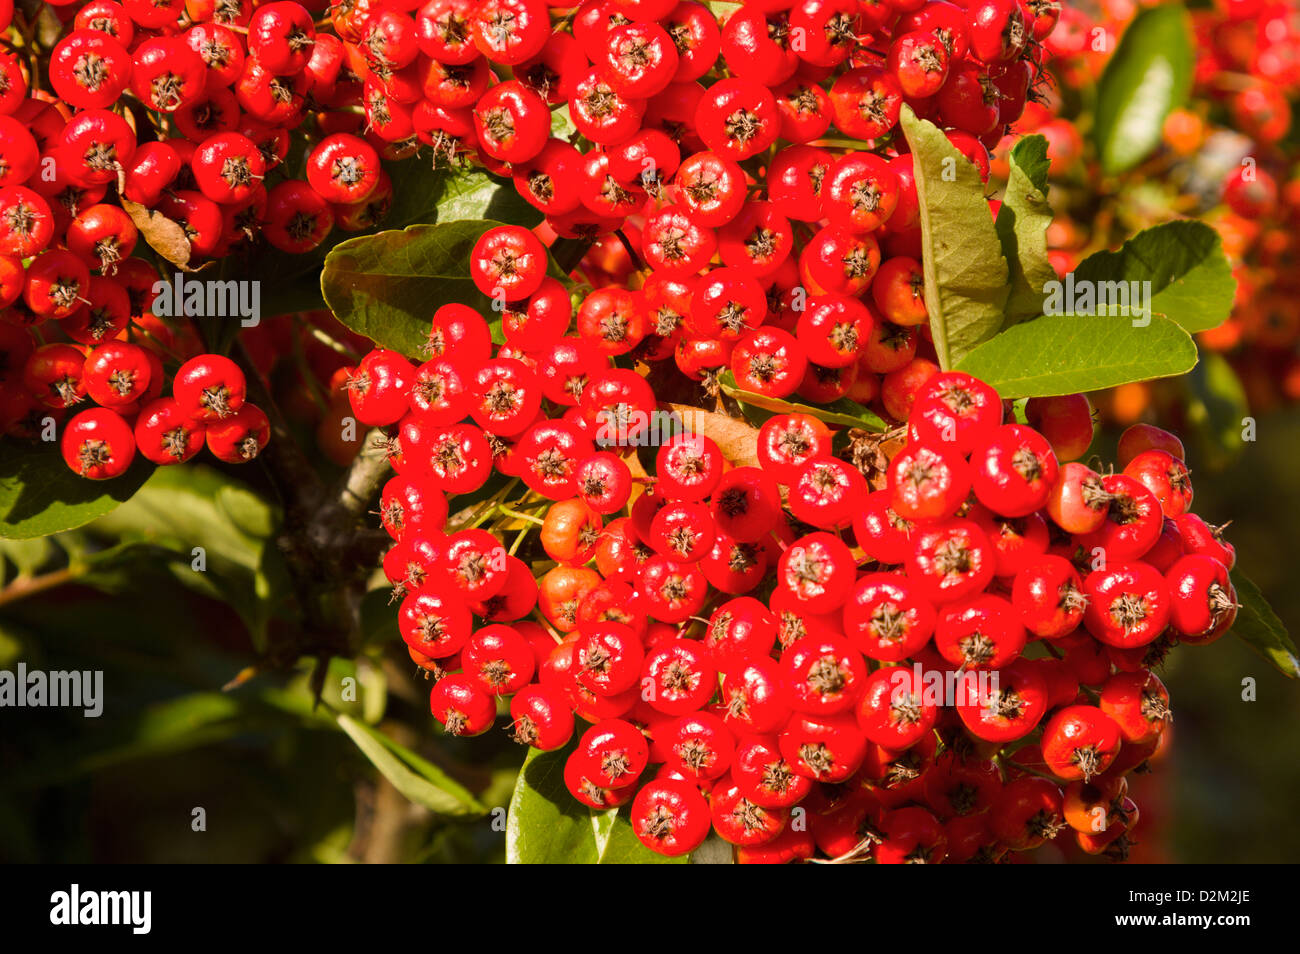 Pyracantha or firethorn berries Stock Photo